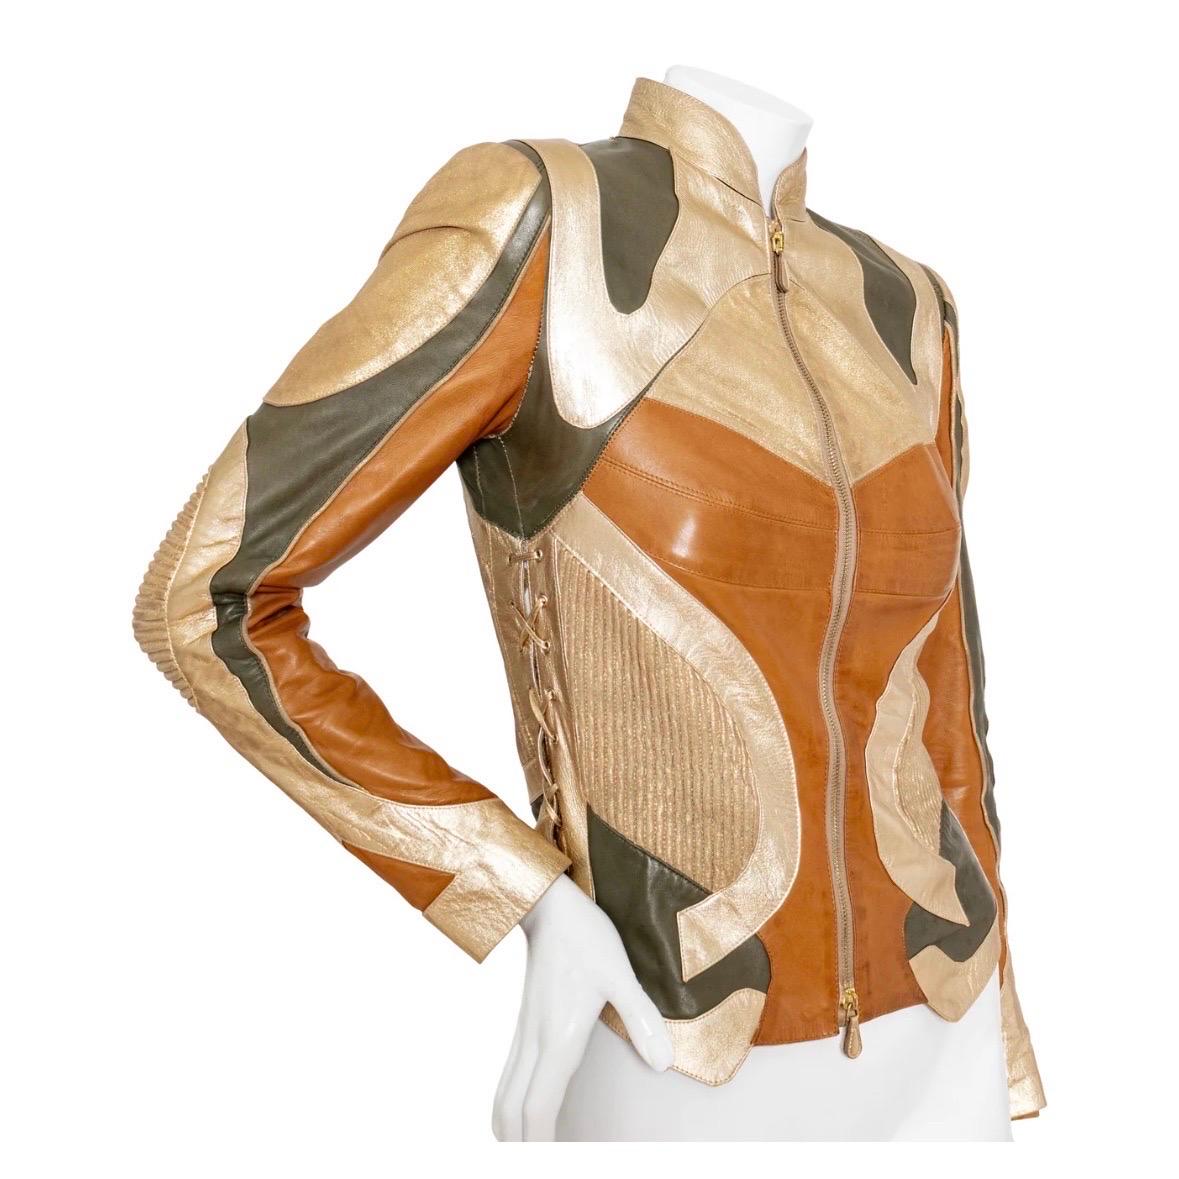 Brown and Gold Patchwork Biker Jacket by Alexander McQueen
Fall 2003 Collection
Multicolored; pearly tan, brown, gold, bronze
Motocross inspired patchwork panels
Gold hardware
Front zip closure; gold-tone zipper with leather pulls
Banded collar
Lace